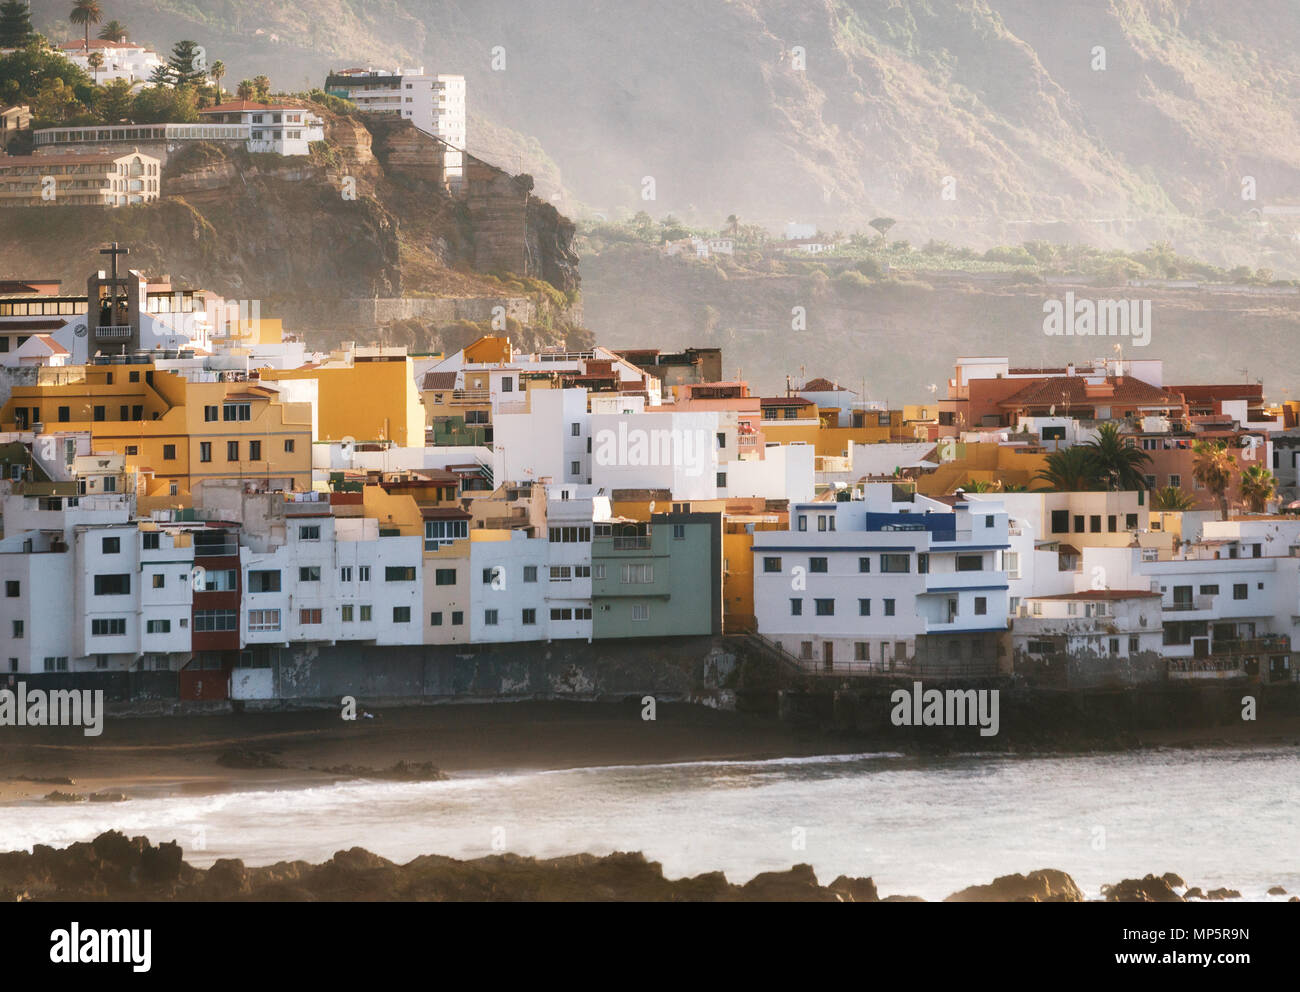 View of colorful houses of Puerto de la cruz, Jardin beach with sunlight at sunset, Tenerife, Canary islands, Spain Stock Photo